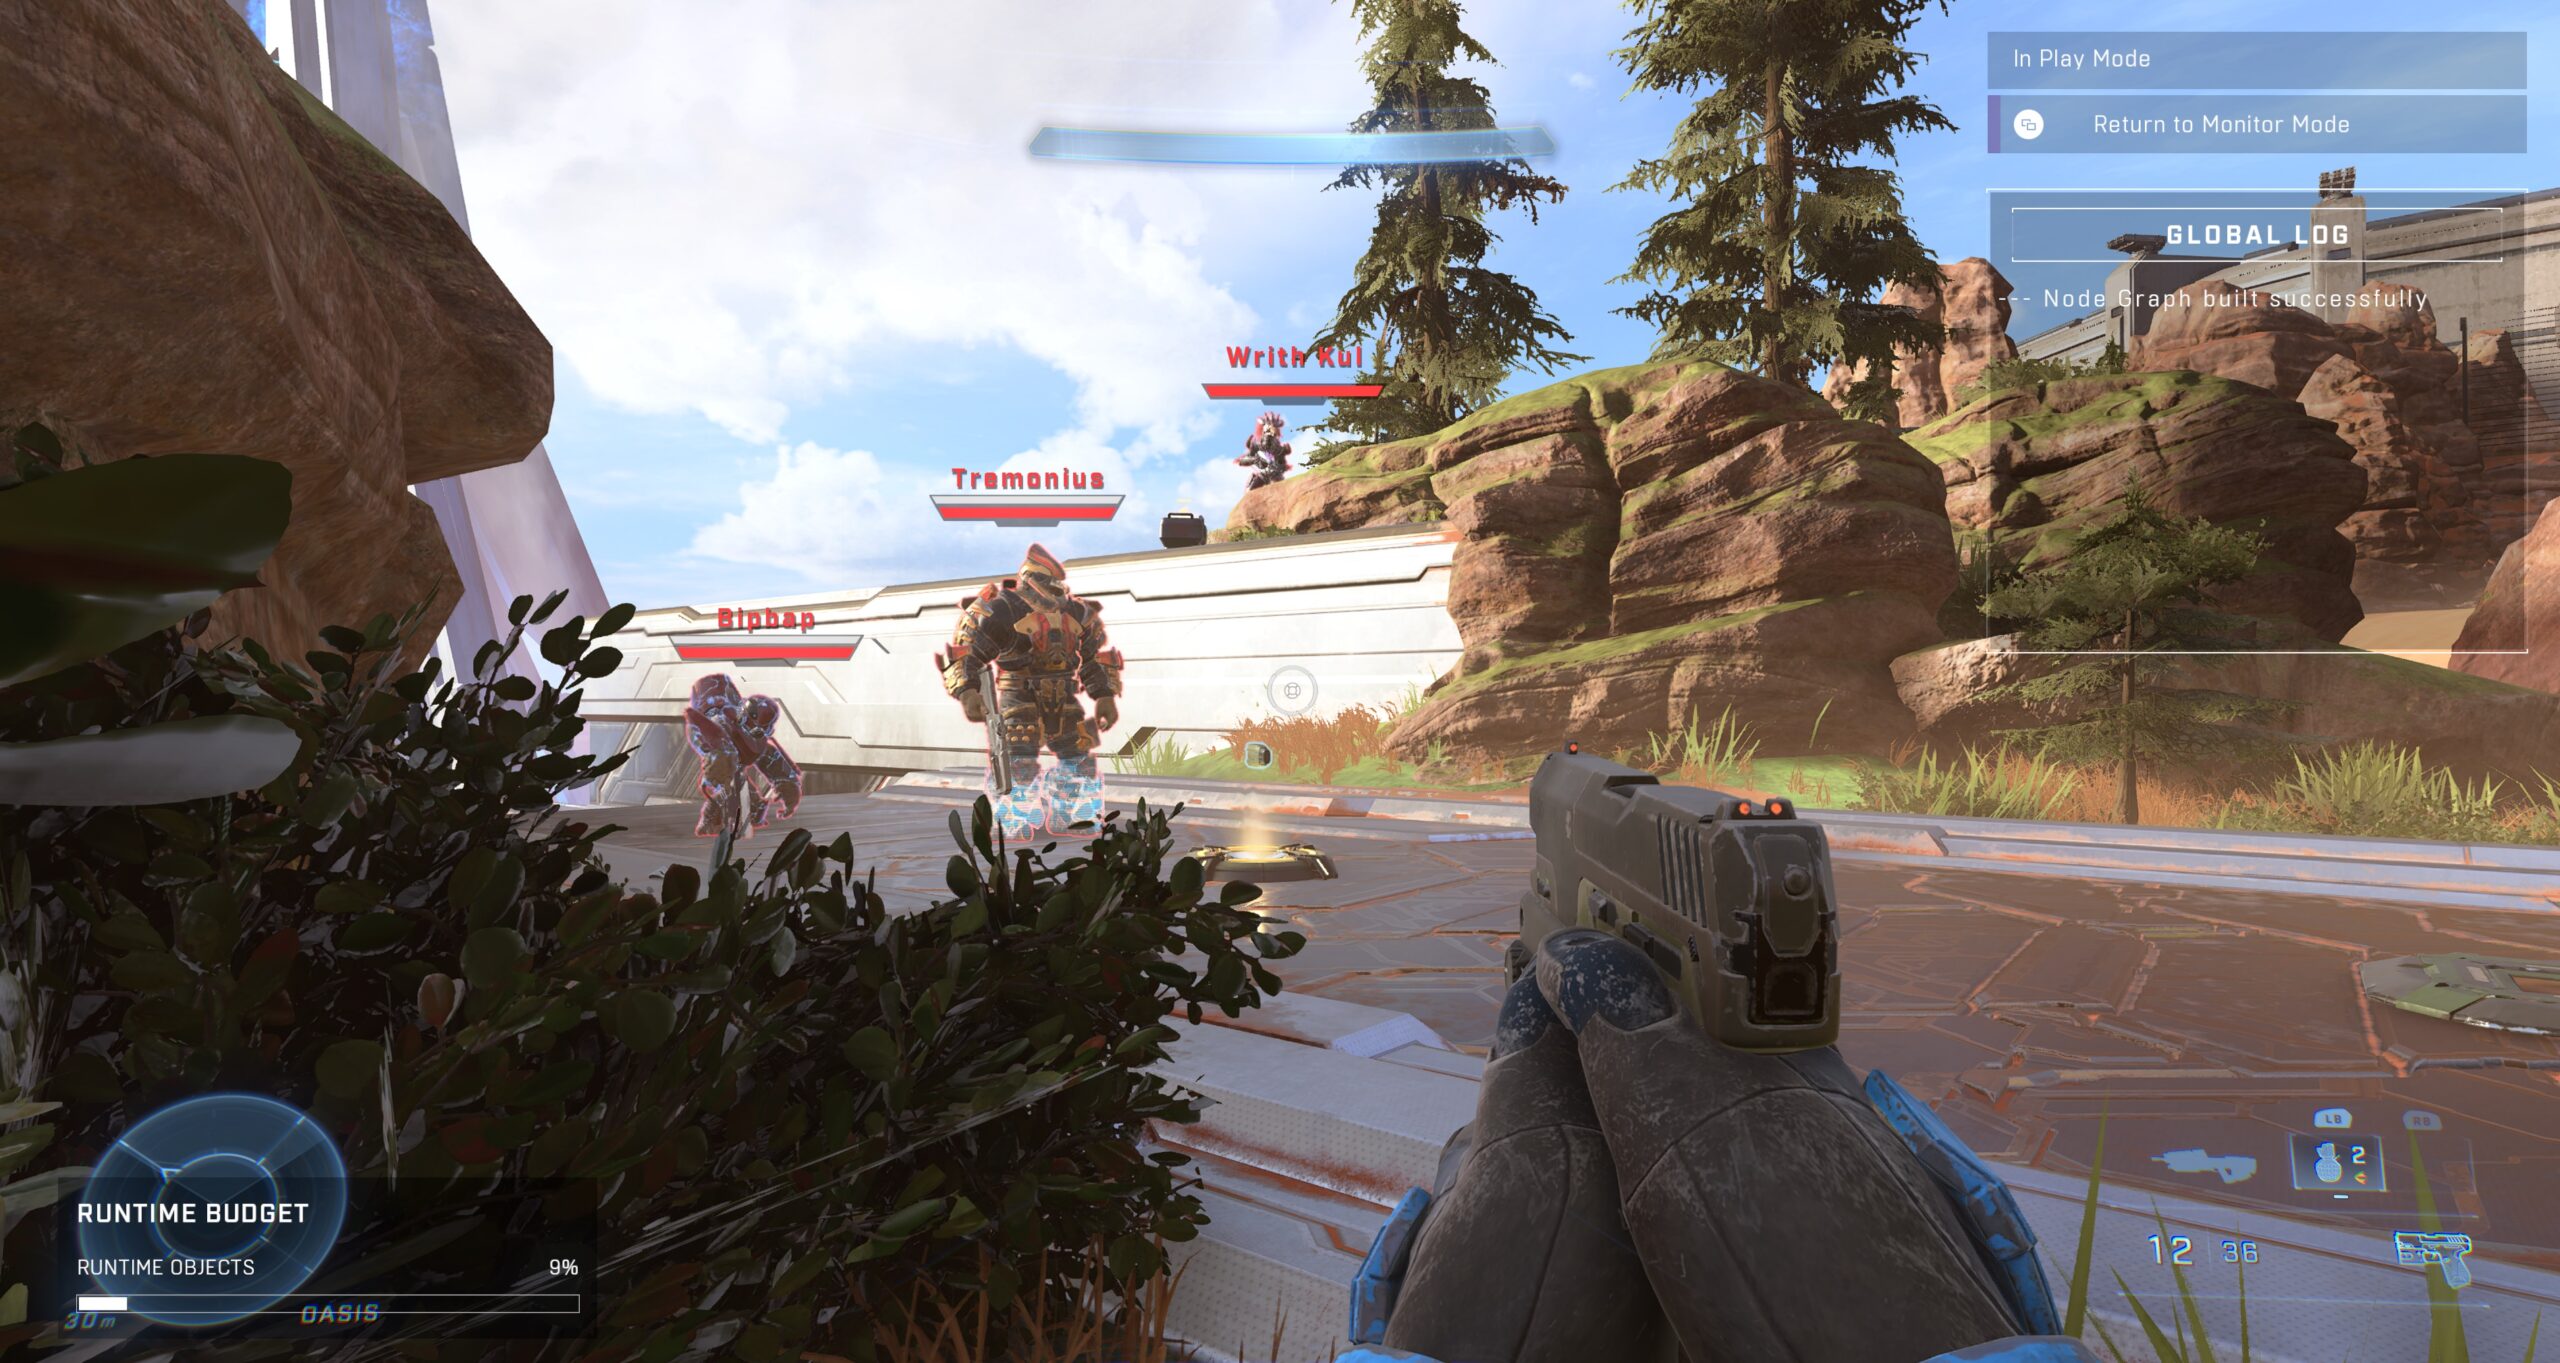 Halo Infinite screenshot of High Value Targets (Bipbap, Tremonius, and Writh Kul) being placed on the map Oasis in Forge